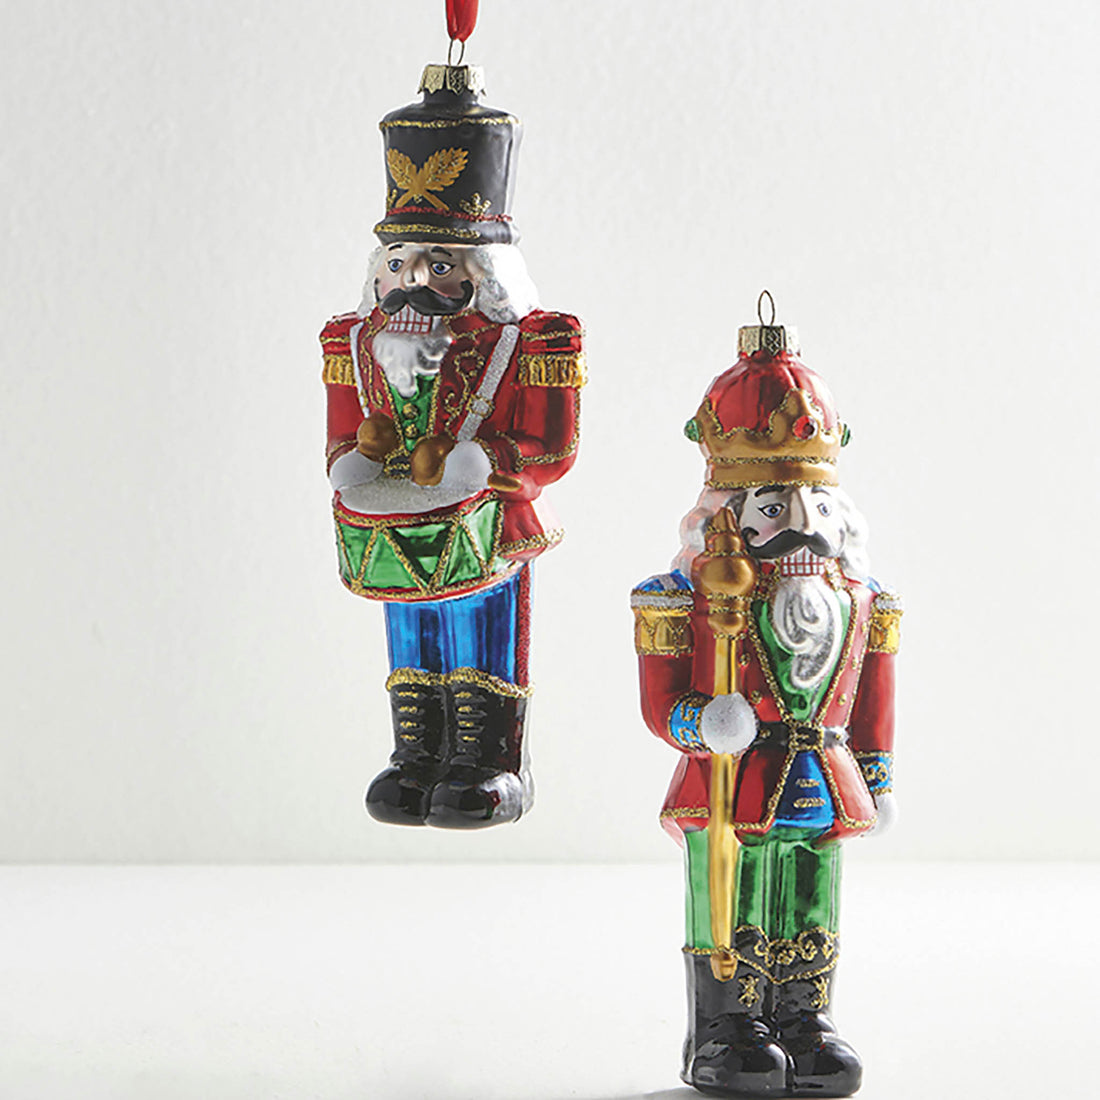 Standing at Attention Nutcracker Ornament (Set of 2)